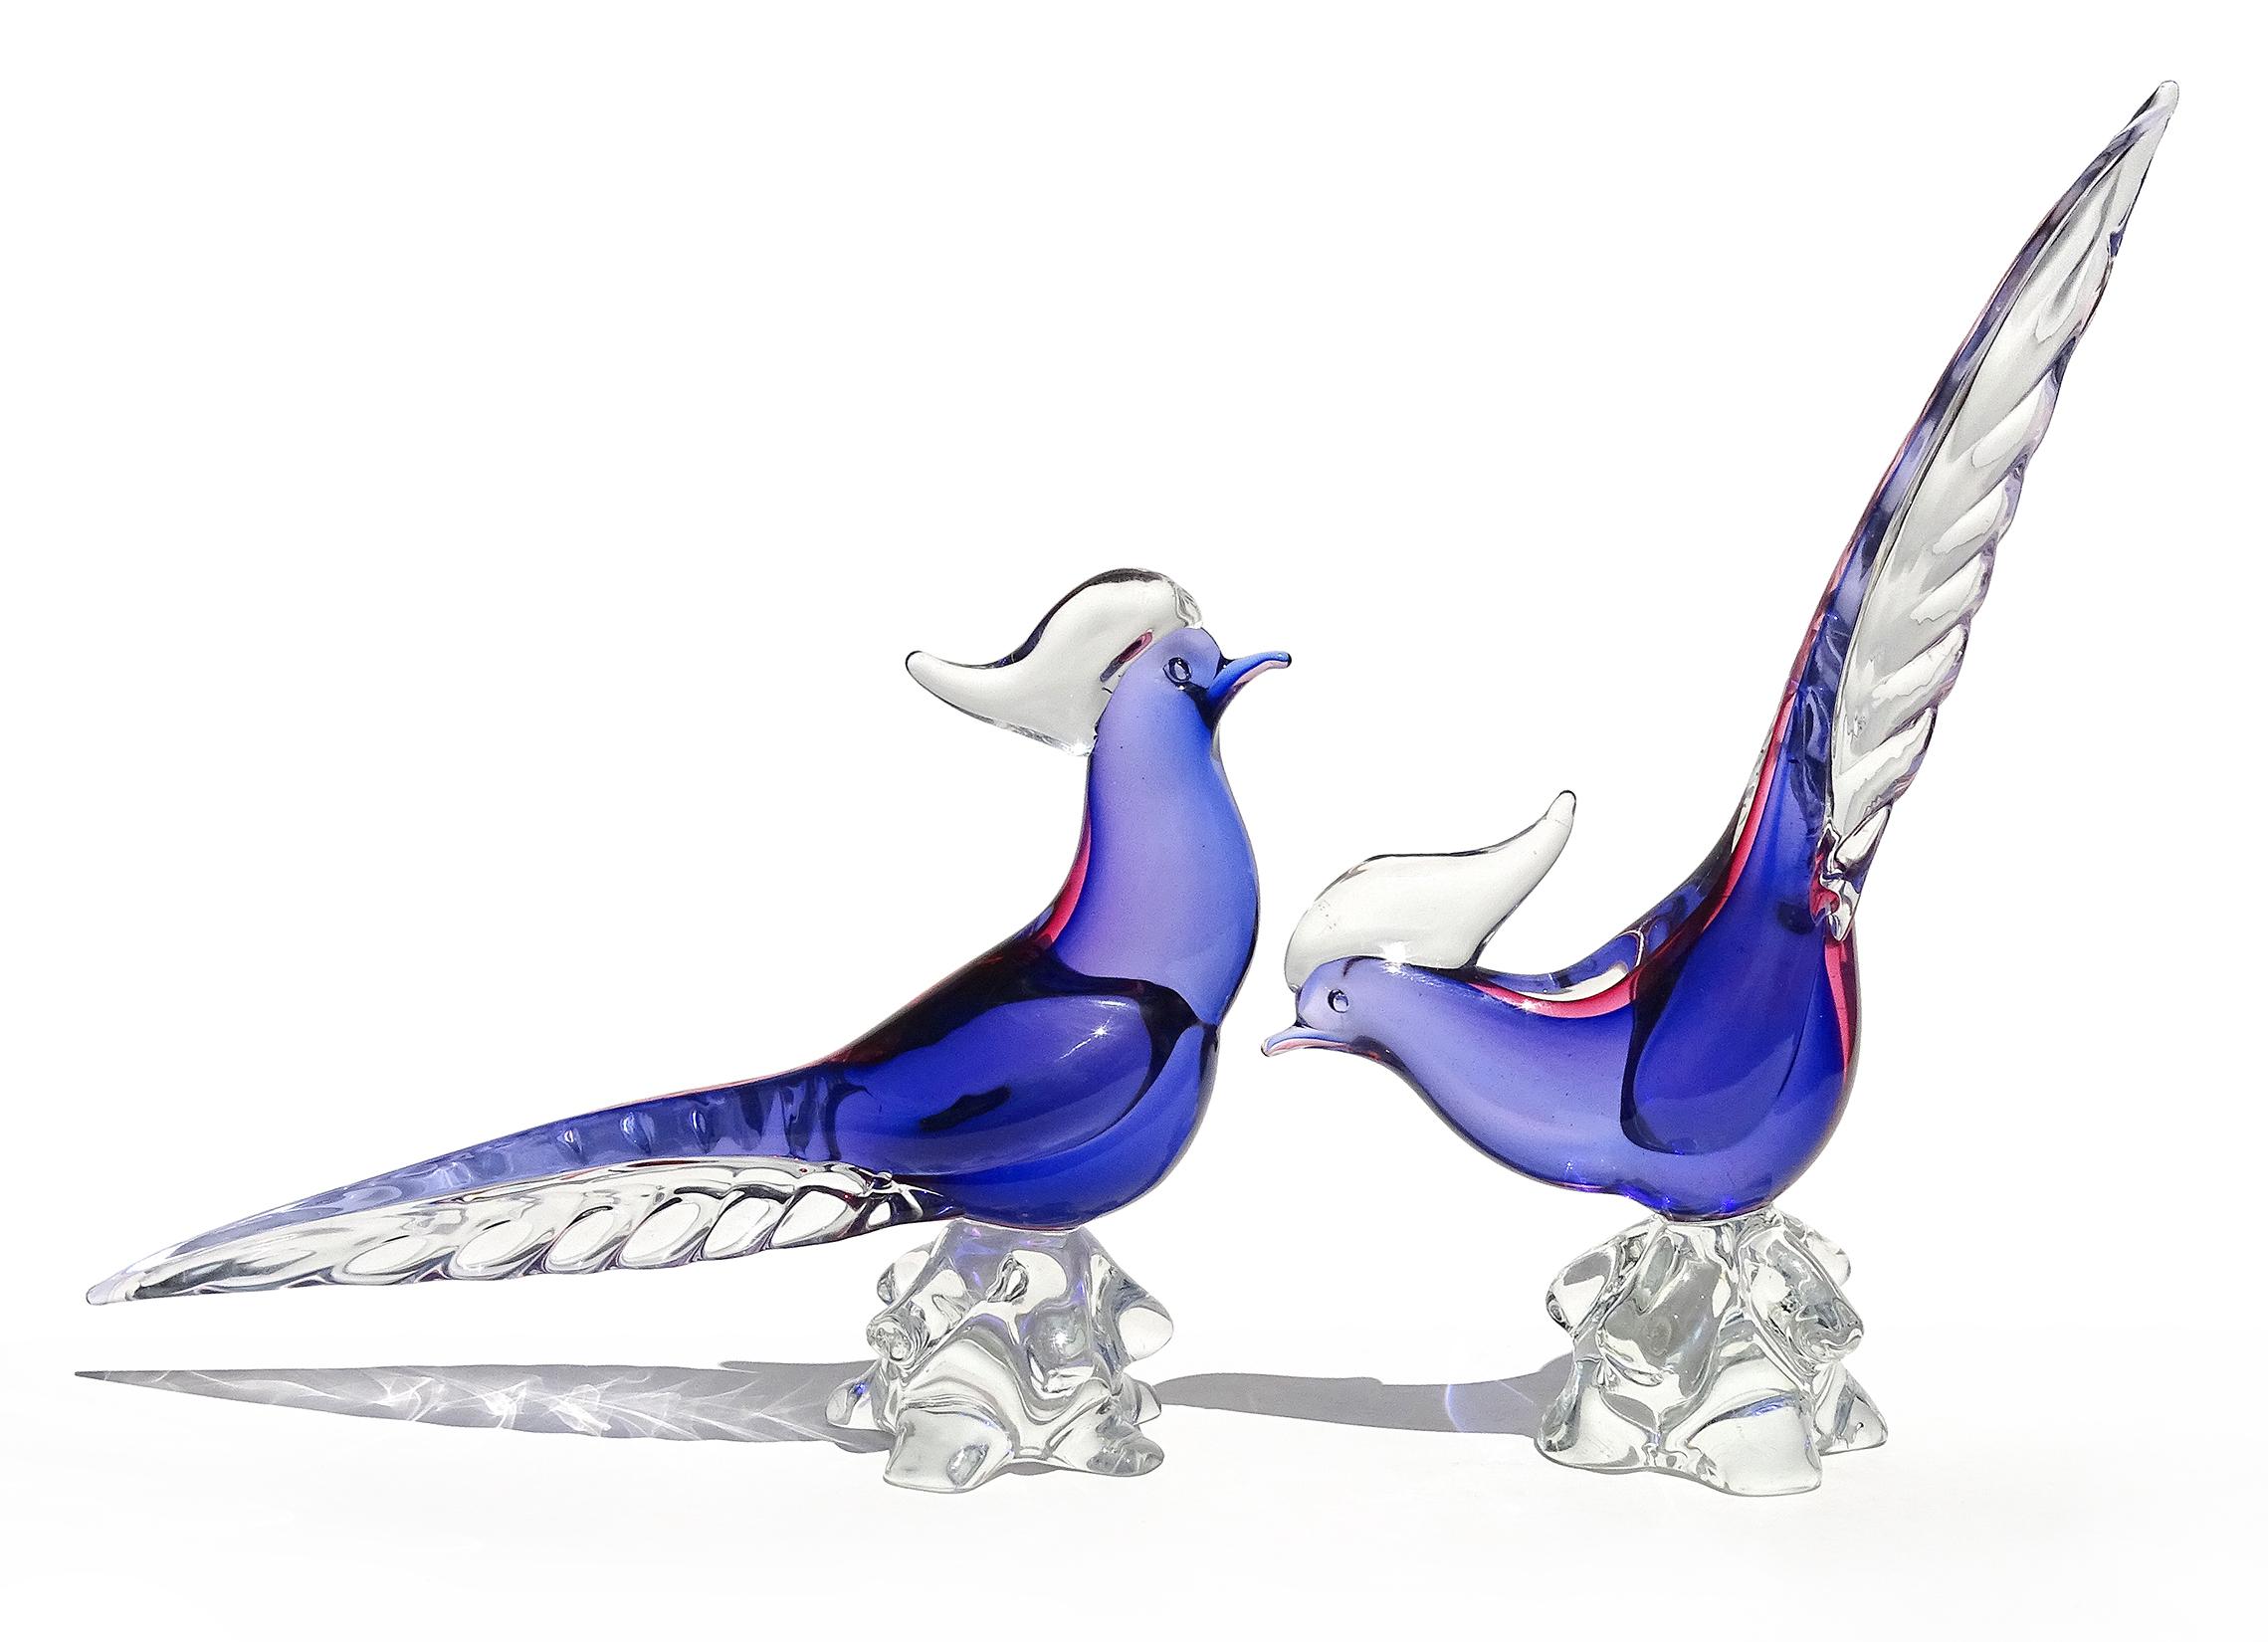 Beautiful vintage Murano hand blown Sommerso pheasant birds Italian art glass sculptures. Attributed to designer Archimede Seguso. The birds have an inner layer of blue, with over layer of ruby pink (Blu - Rubino). They look a bit purple from the